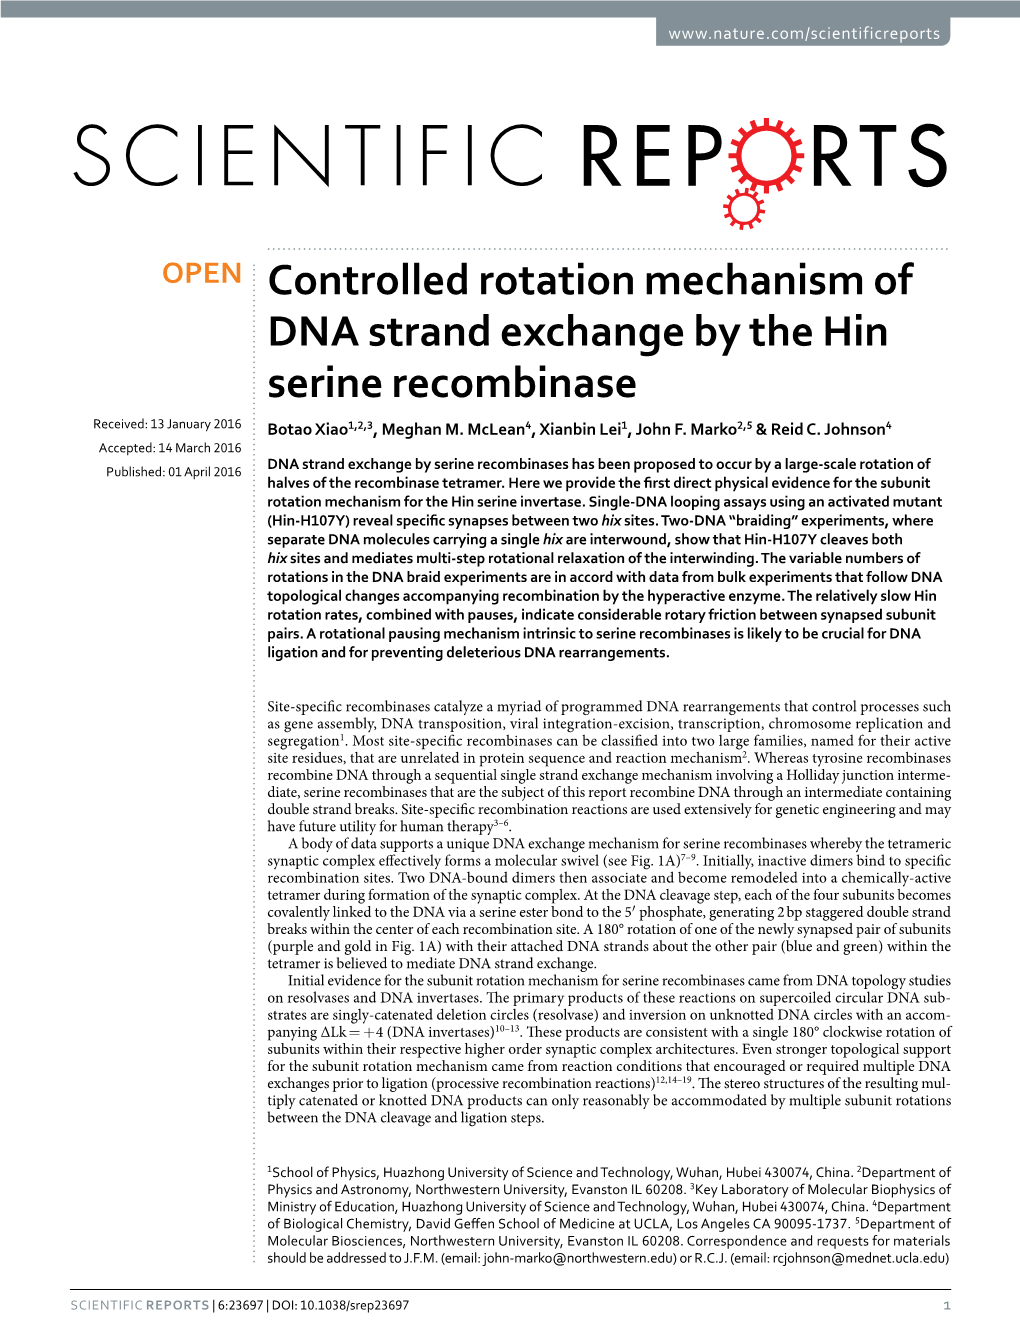 Controlled Rotation Mechanism of DNA Strand Exchange by the Hin Serine Recombinase Received: 13 January 2016 Botao Xiao1,2,3, Meghan M